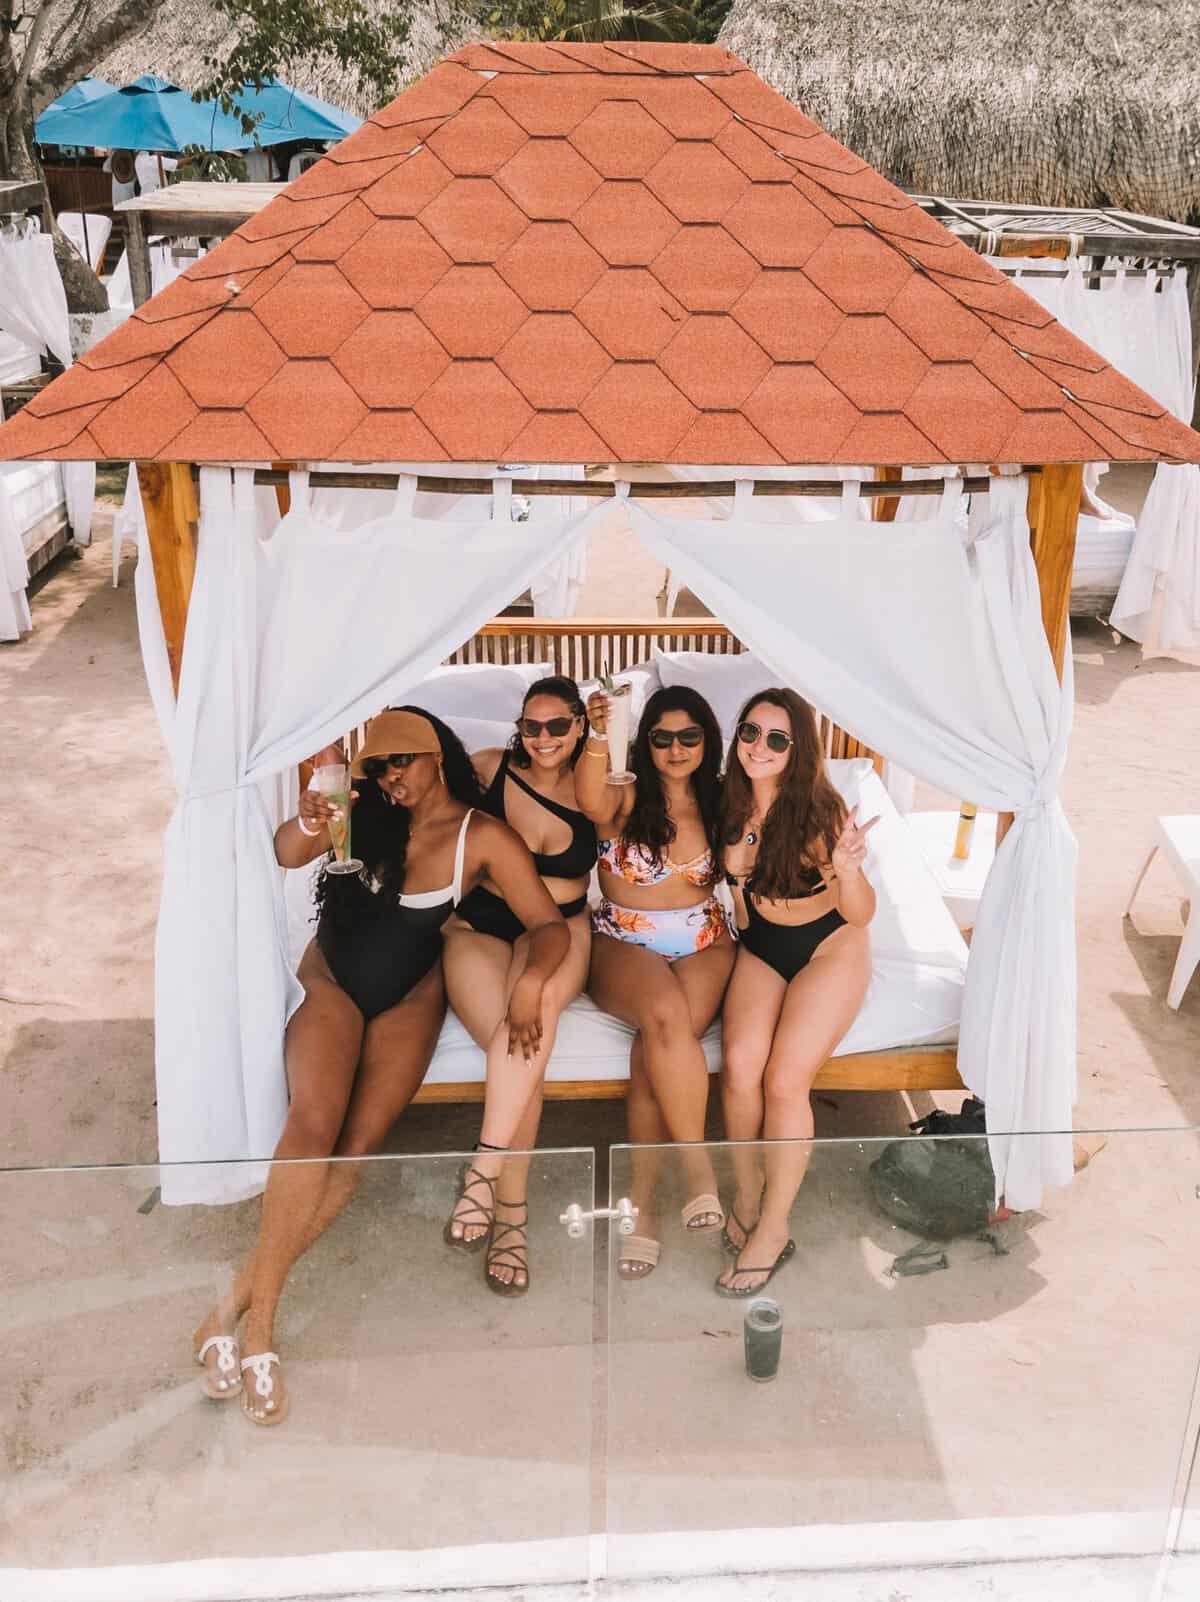 The four of us girls sitting in our day bed and smiling for the camera at Bora Bora Beach Club.